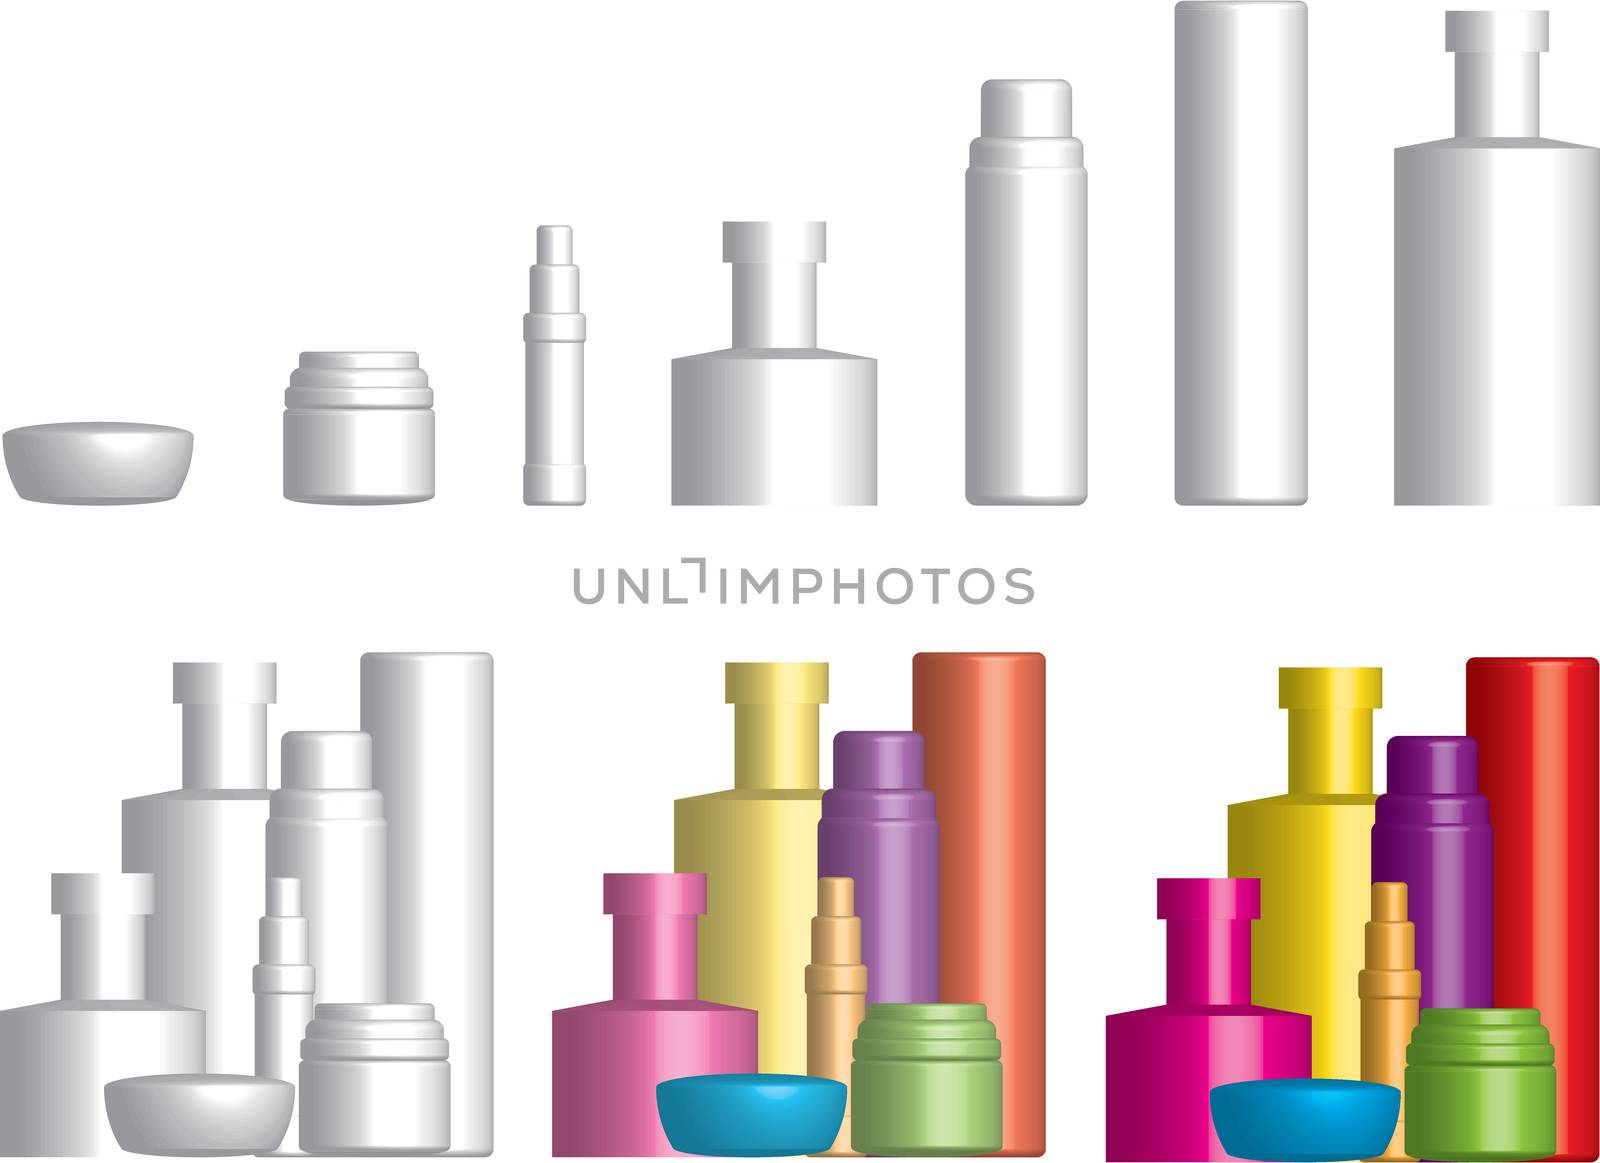 An Illustration of Various Cosmetics Containers